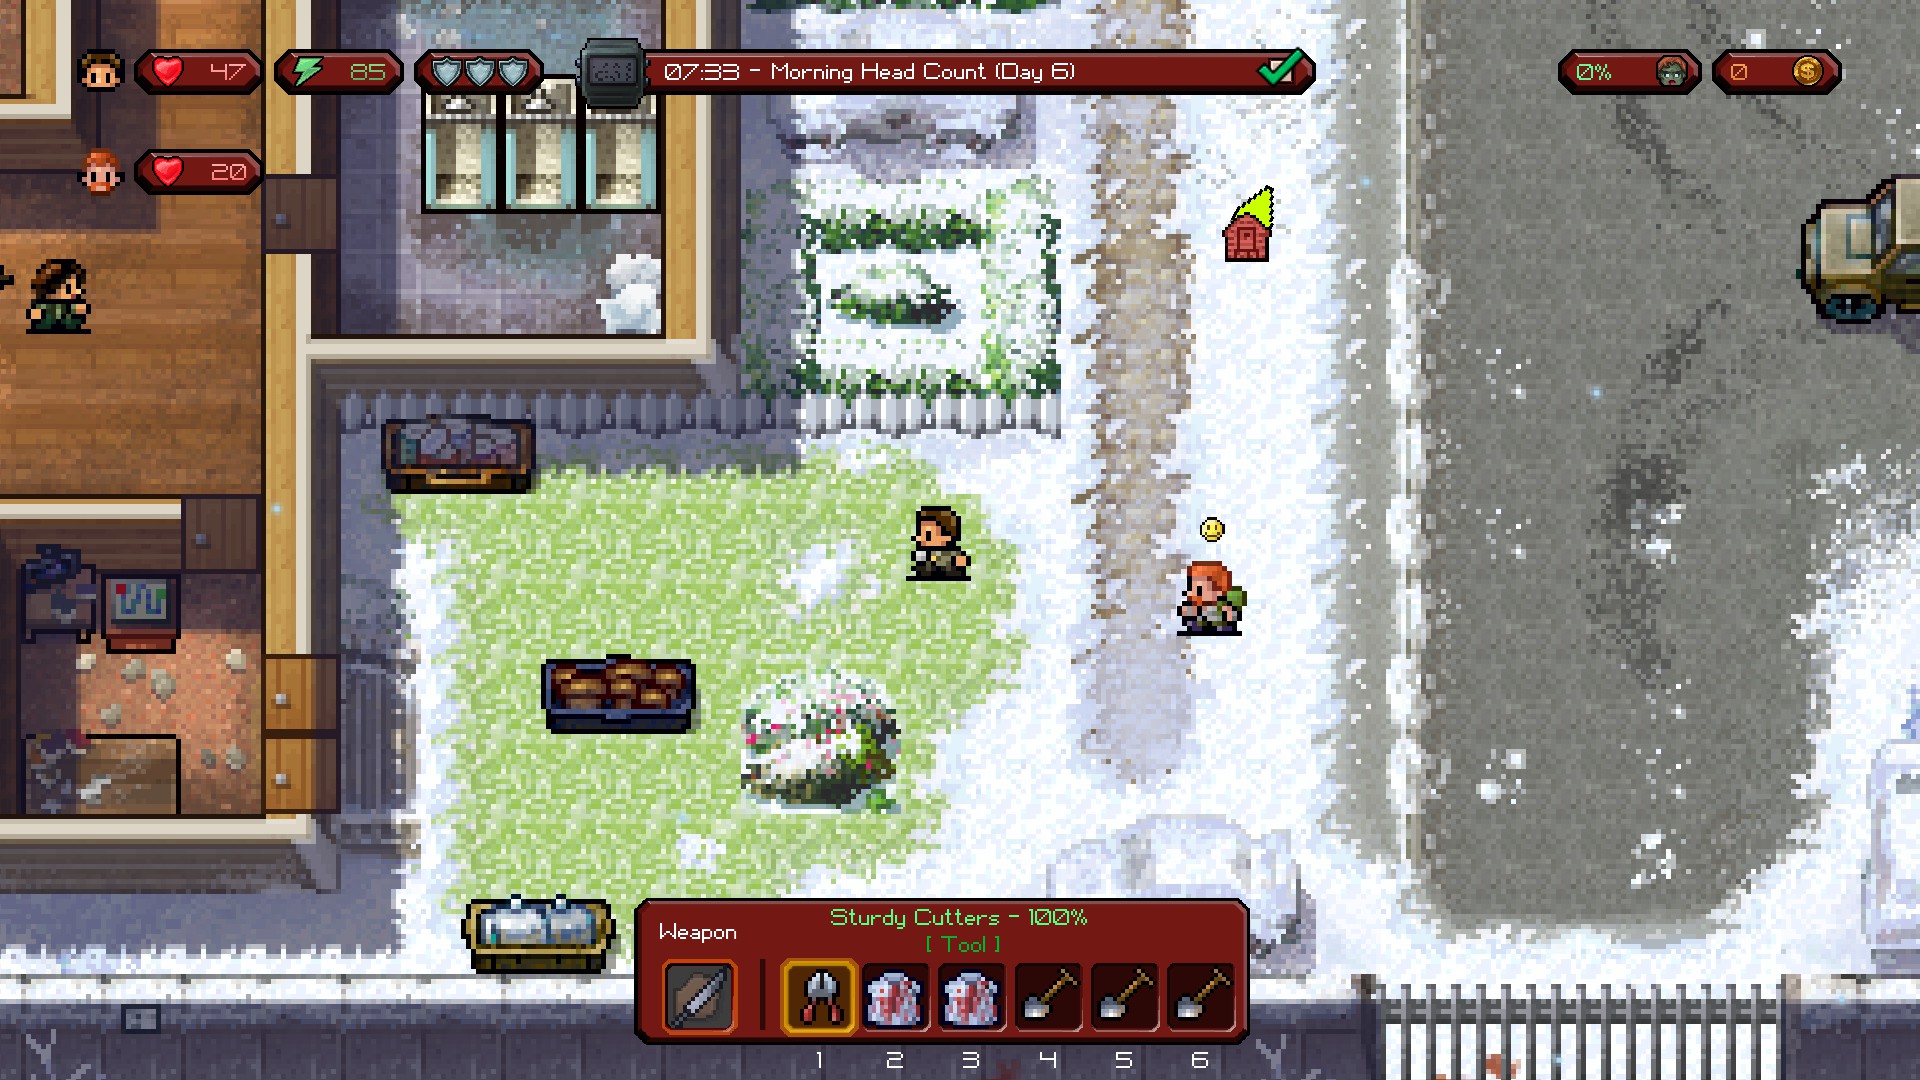 The Escapists: The Walking Dead Free Download